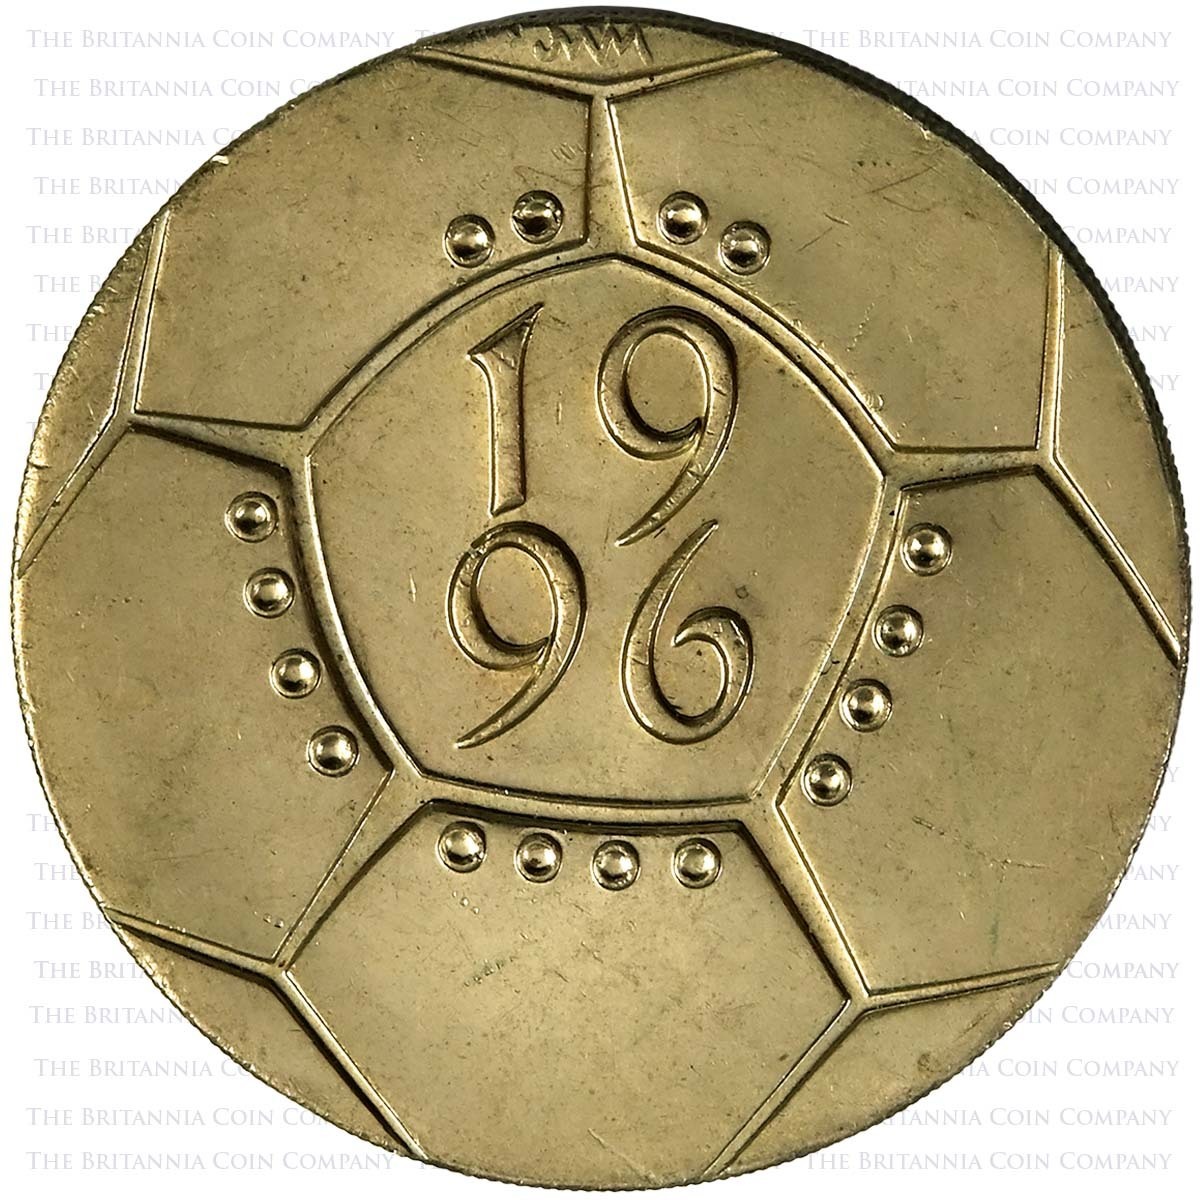 The final single-metal £2 issued in the UK was this 1996 coin in the shape of a football. In this year, England hosted the UEFA European Championship. The England team didn't win Euro 96 and haven't taken home the trophy yet but that hasn't stopped this c